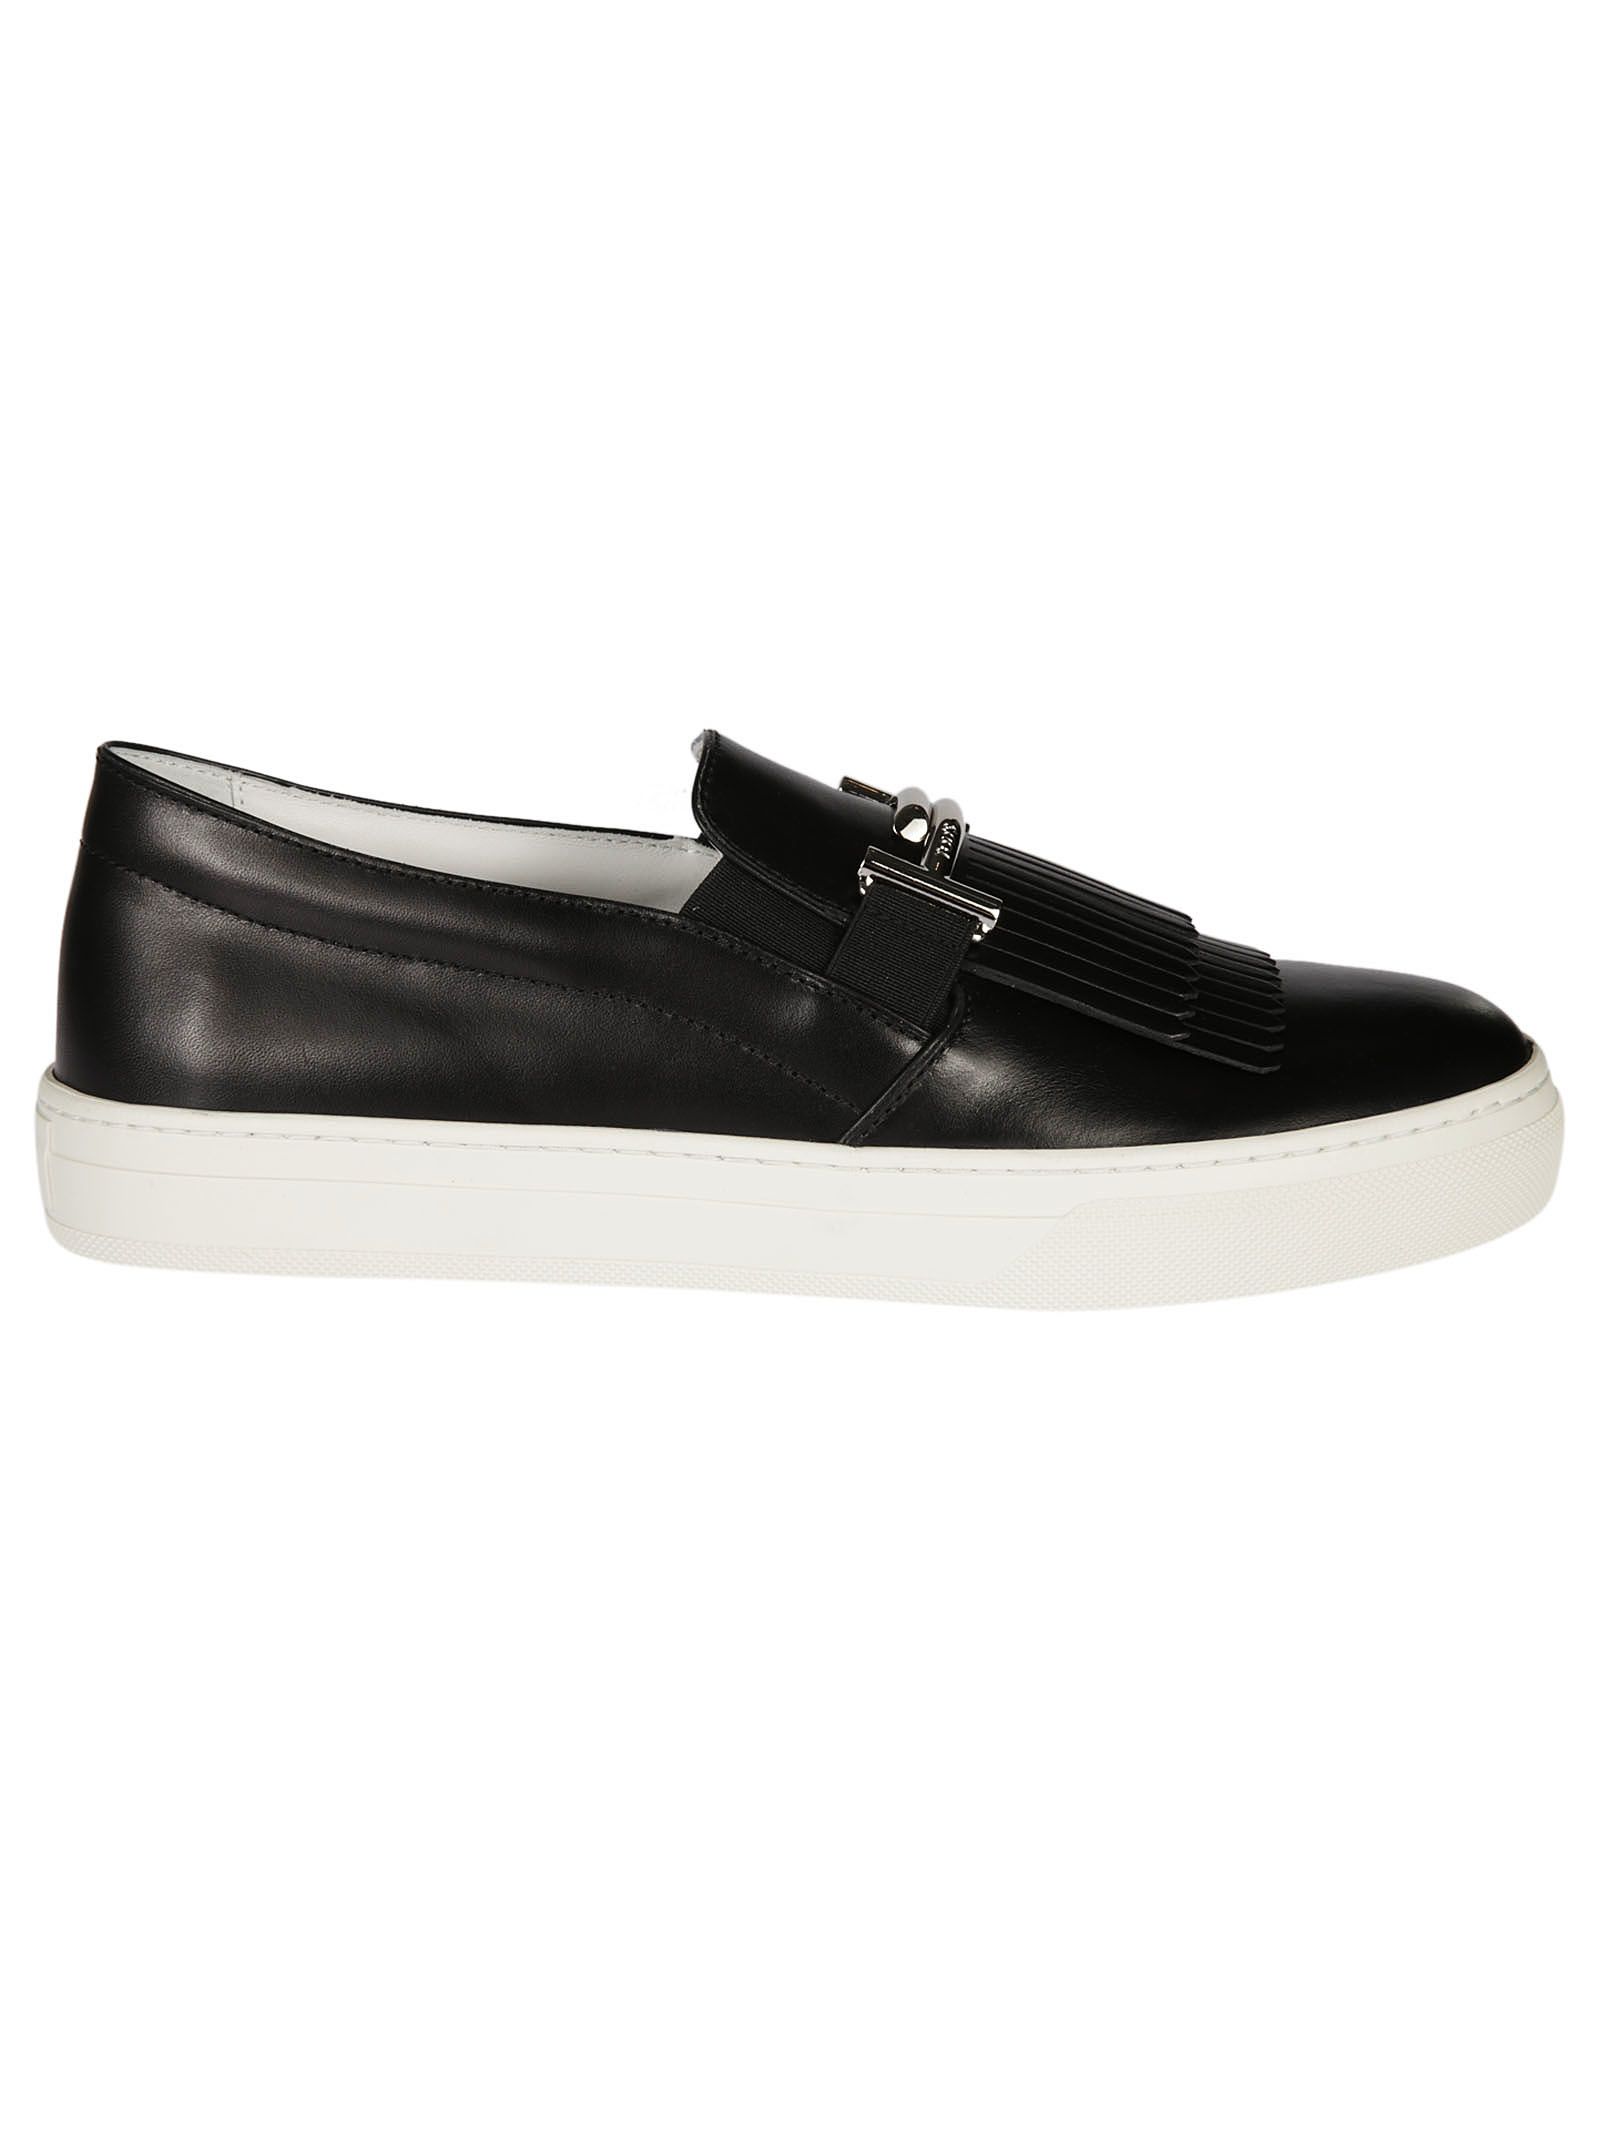 Tod's - Tod's Tod`s Fringed Flap Slip-on Sneakers - Black, Women's ...